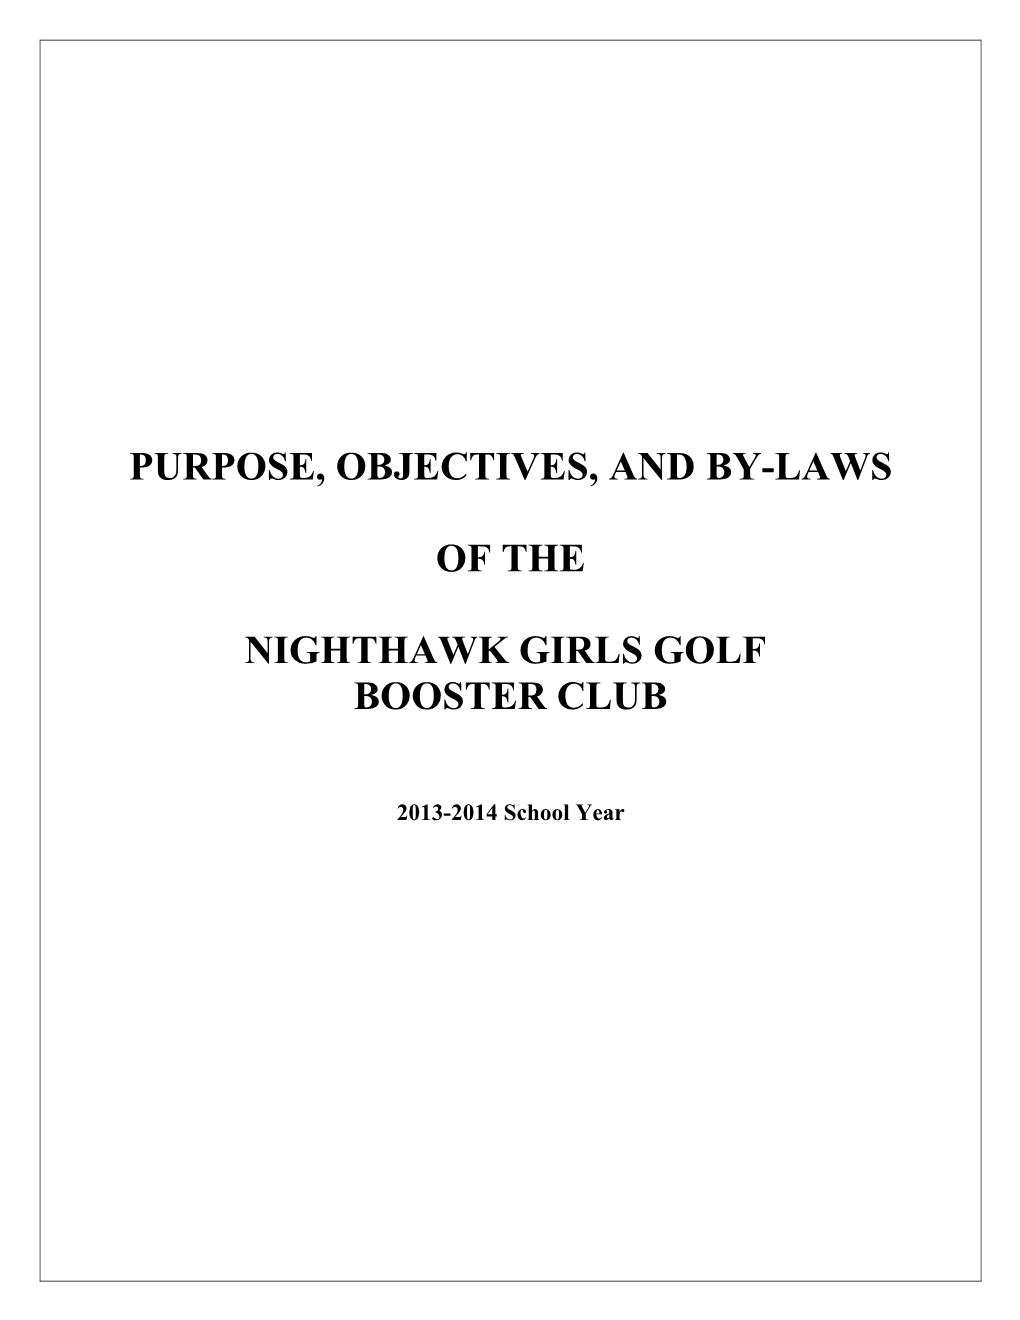 Purpose, Objectives, & By-Laws: Nighthawks Girls Golf Booster Club